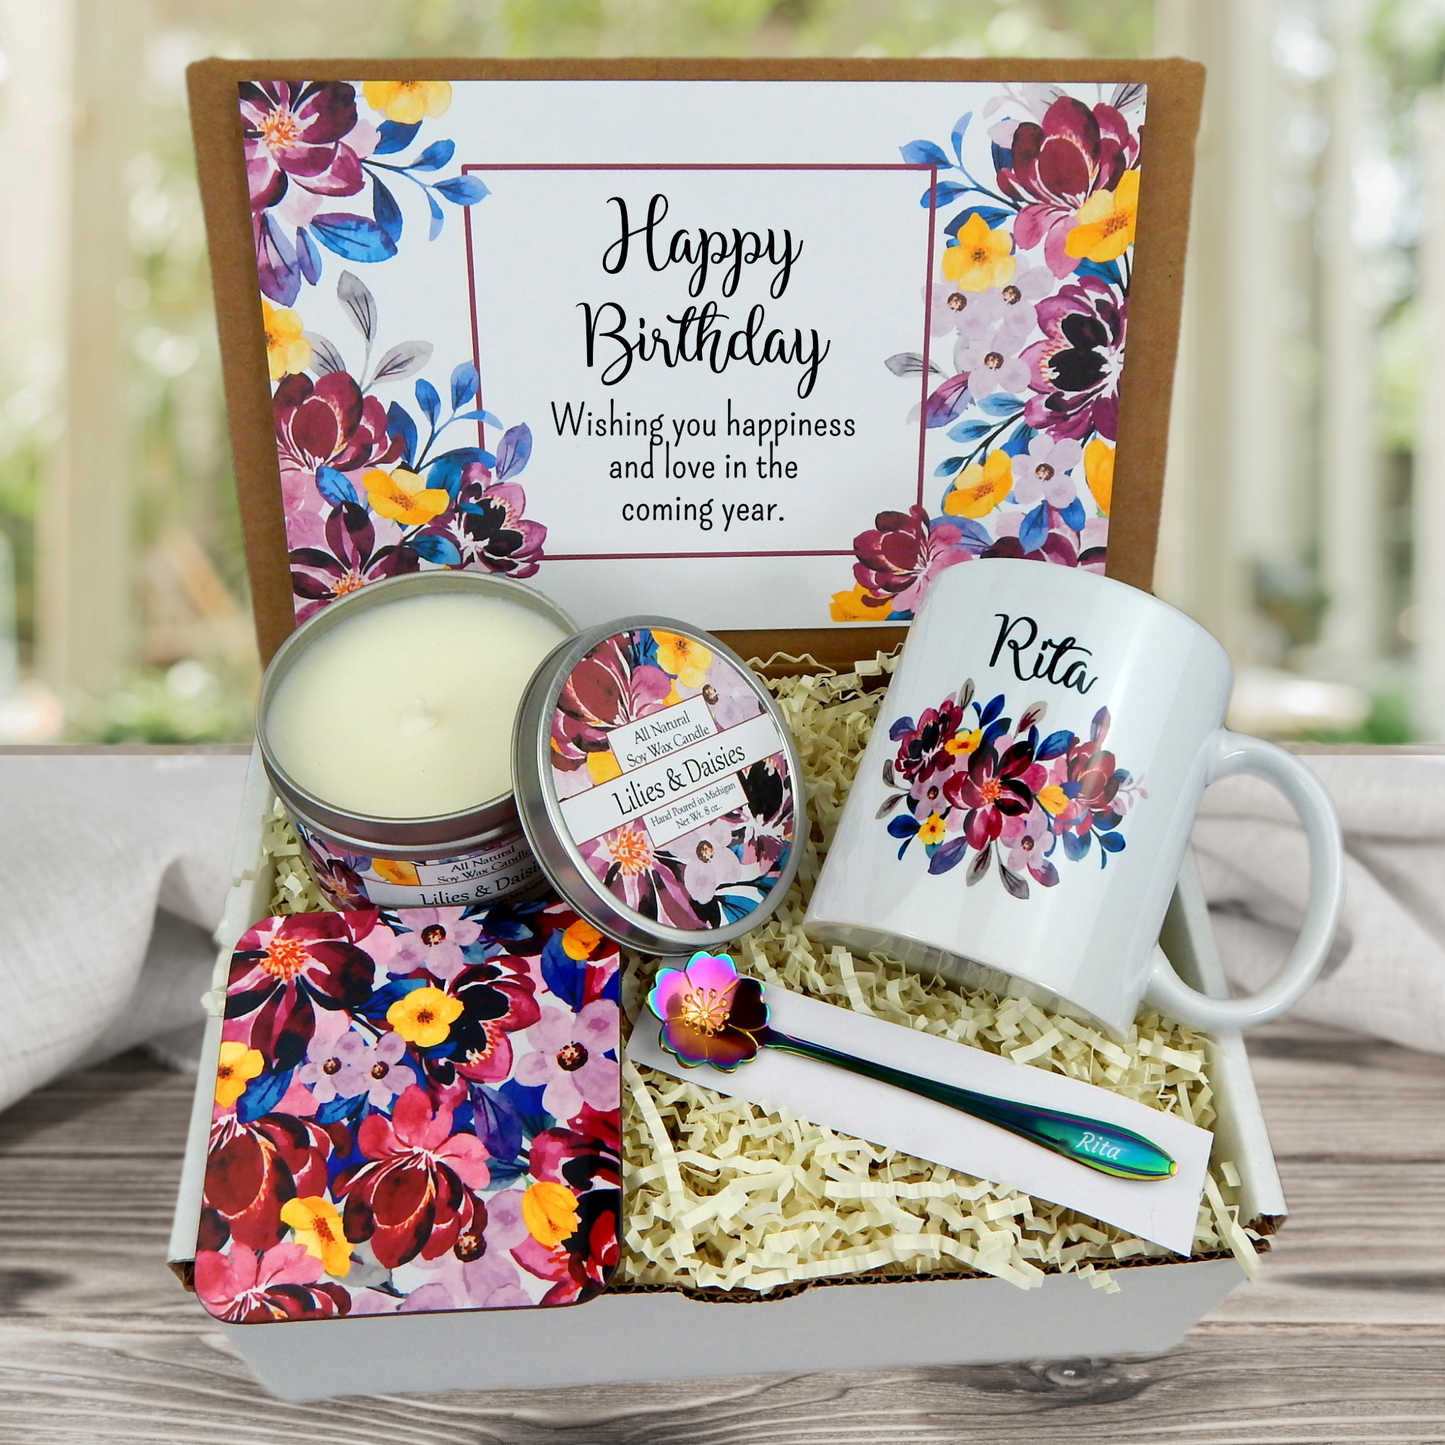 Happy Birthday Travel Cup Giftware in Greenfield, MA - FLORAL AFFAIRS